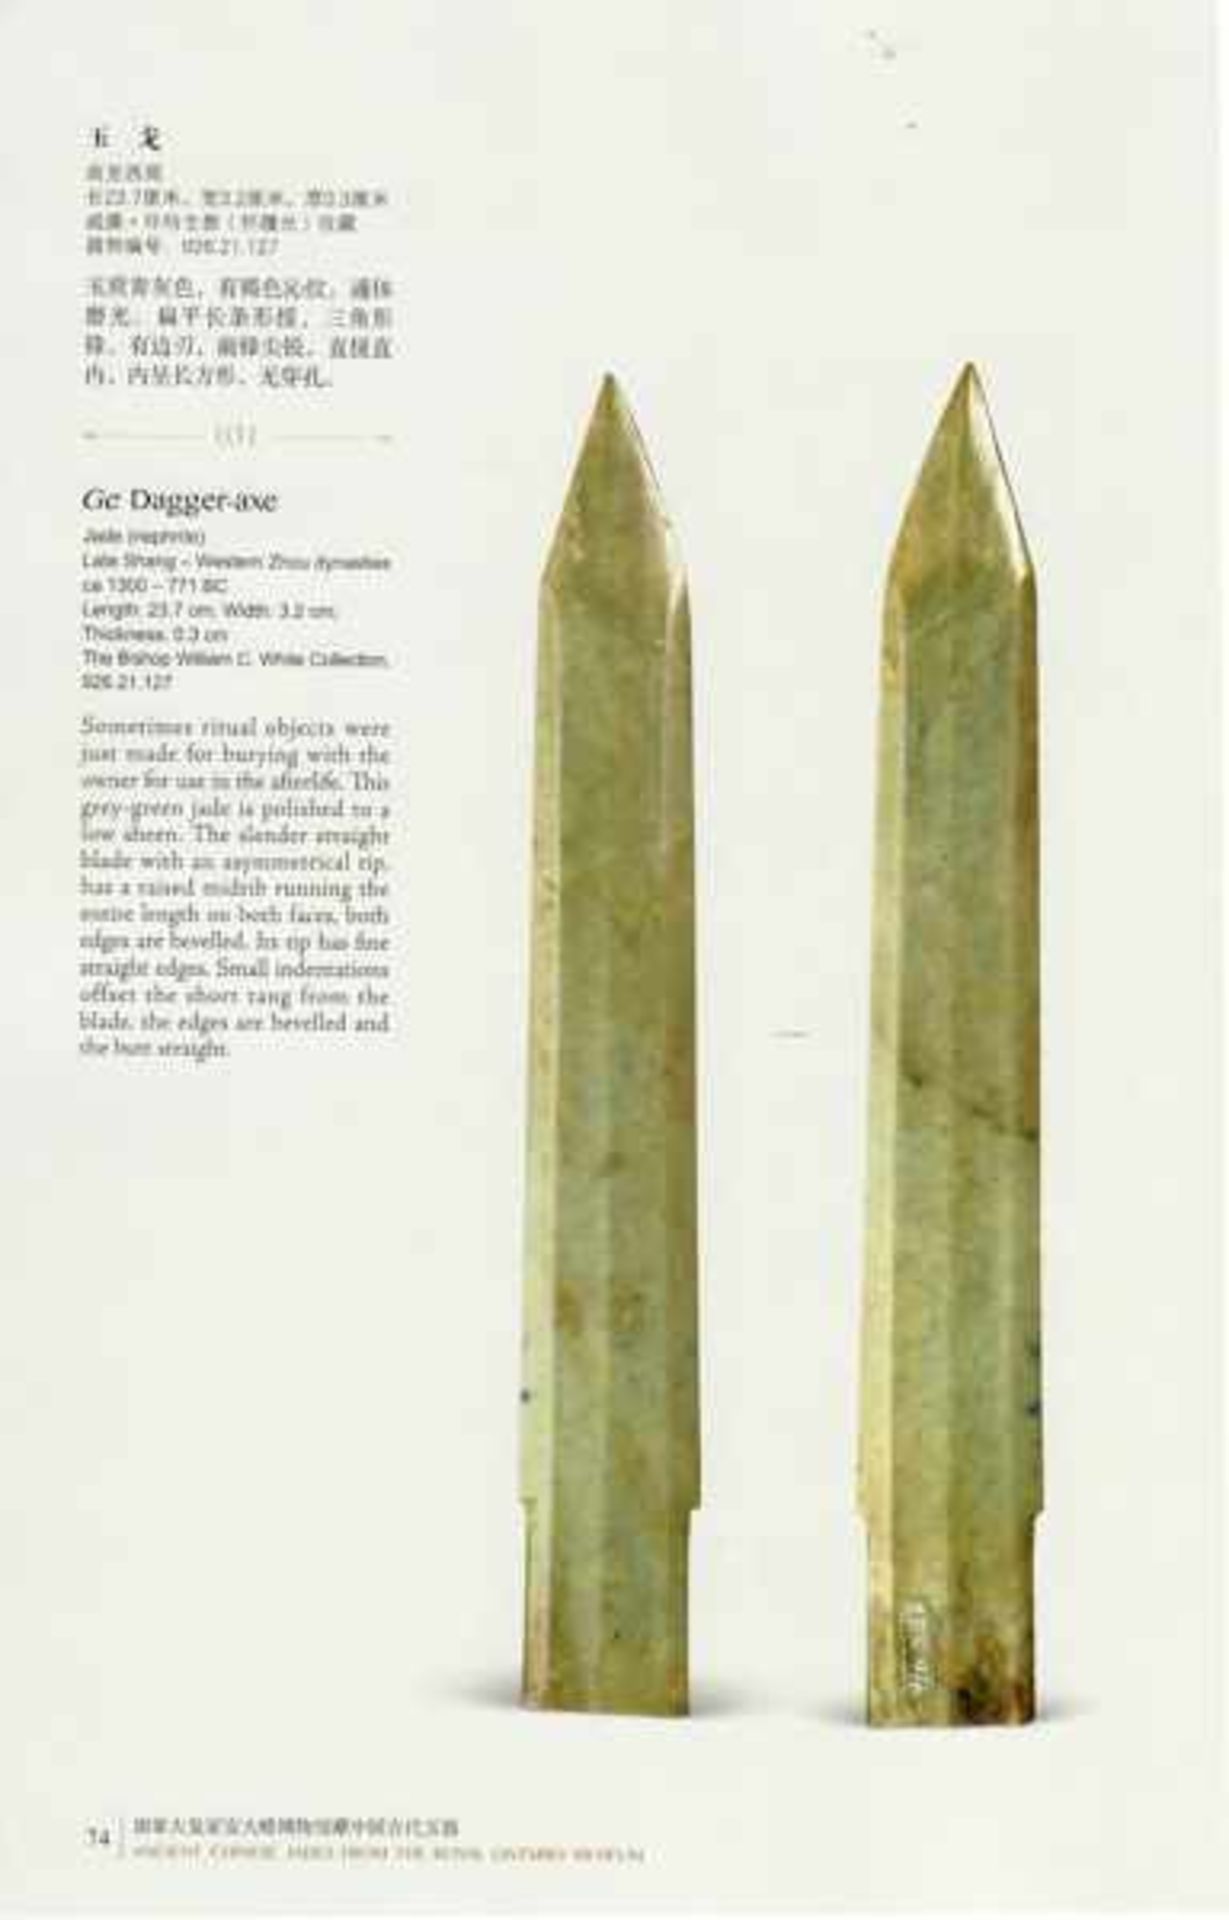 A FINELY CARVED SMALL GE DAGGER-AXE IN YELLOWISH JADE WITH DELICATE GROOVES Jade. China, Late Shang, - Image 7 of 7